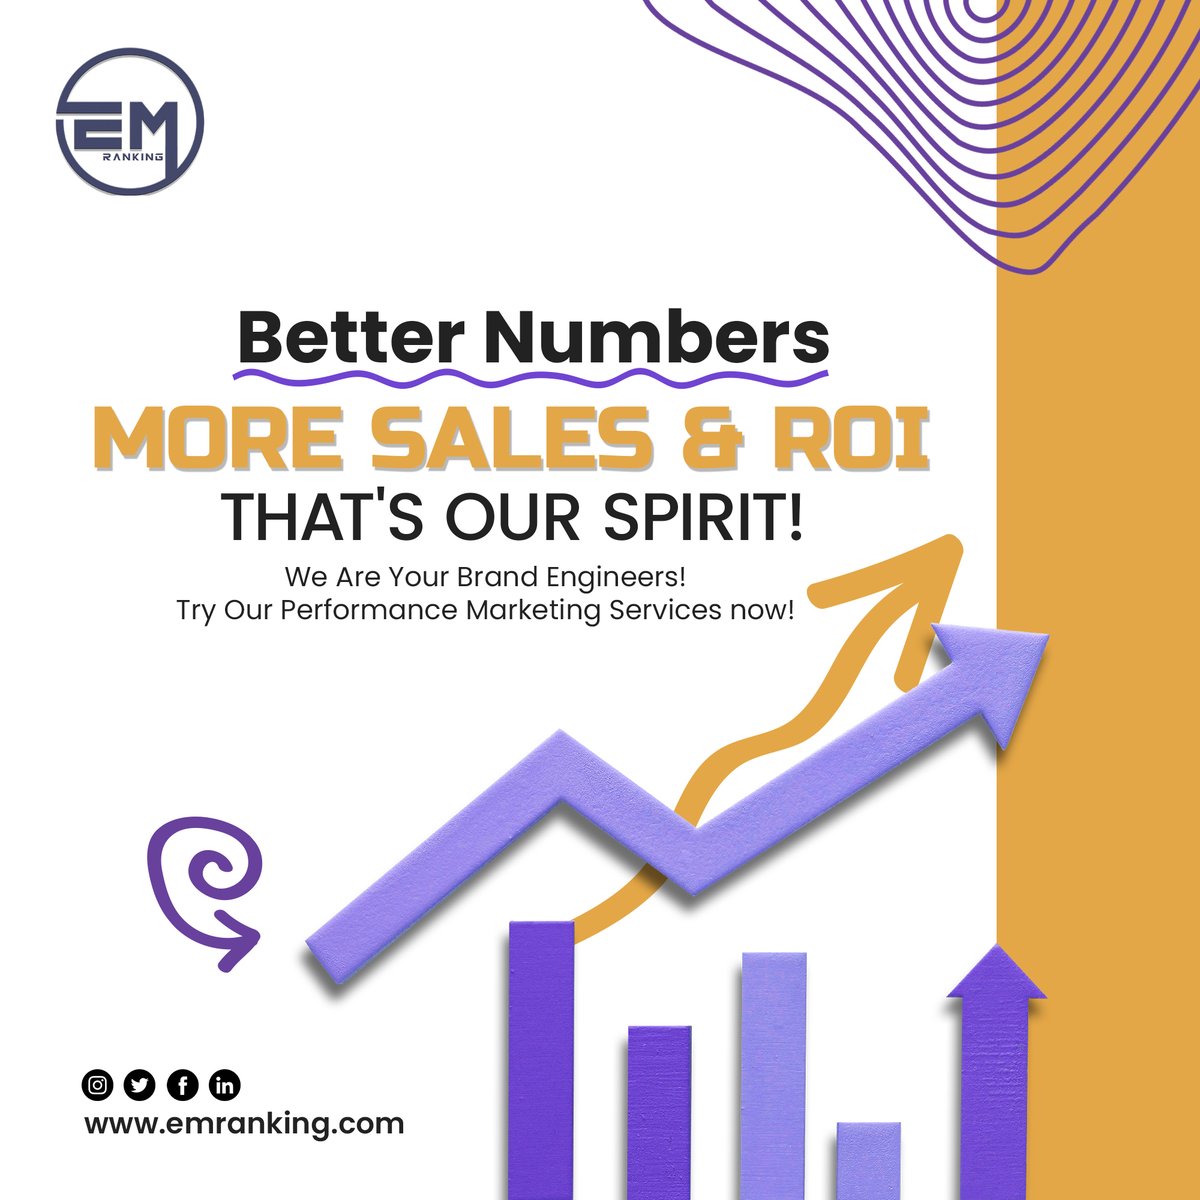 Achieve your business goals with data-driven performance marketing solutions.

#PerformanceMarketingSolutions #ROIBoosters #DataDrivenMarketing #DigitalAdvertising #MeasurableResults #TargetedMarketing #MaximizeConversions #MarketingStrategy #emranking